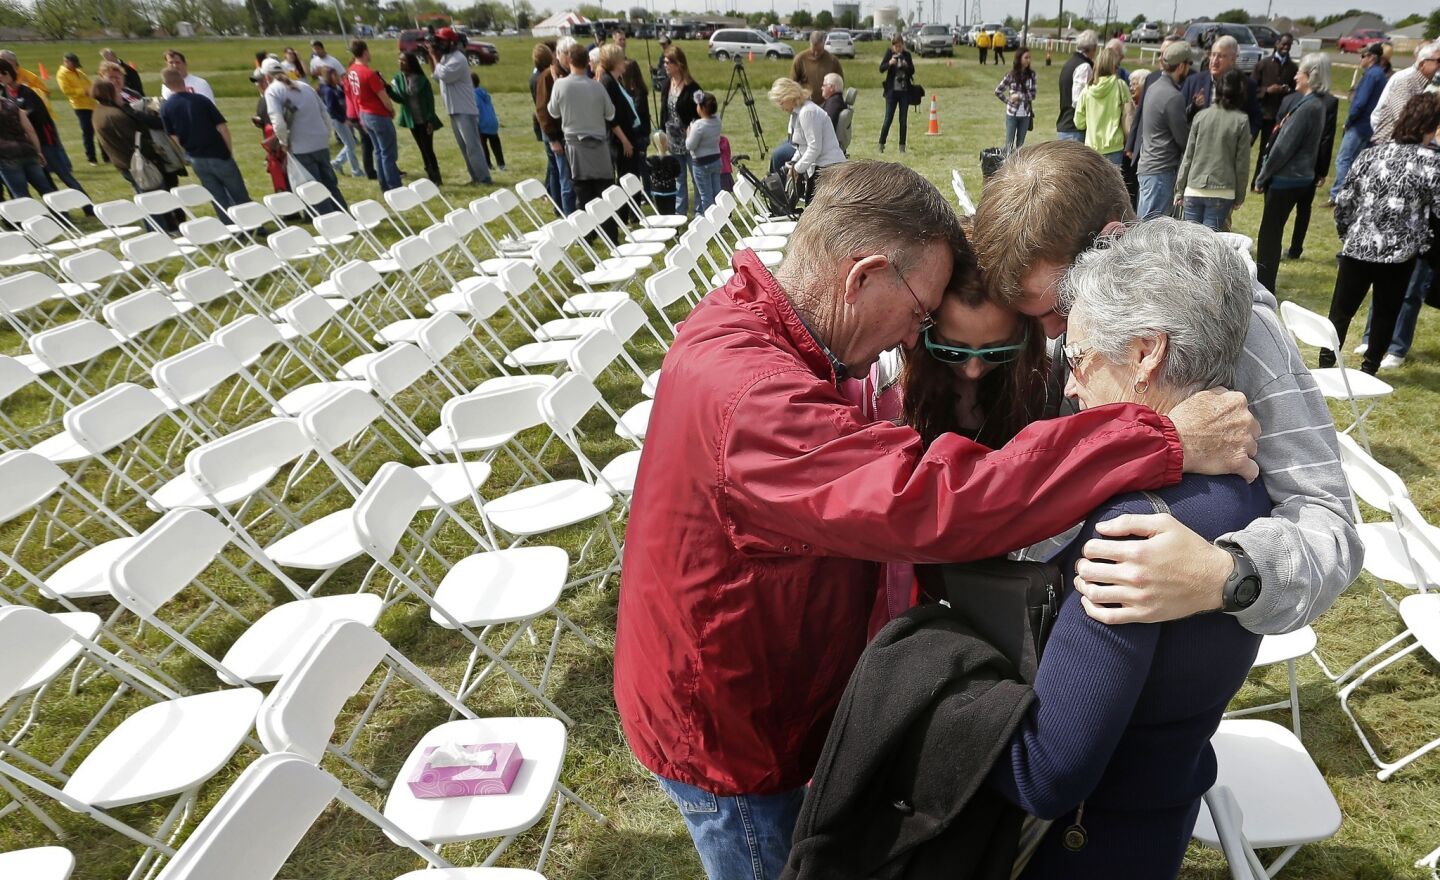 Churchgoers pray after a First Baptist Church service held in a field because the building was in the damage zone after a massive explosion at a fertilizer plant in West, Texas.